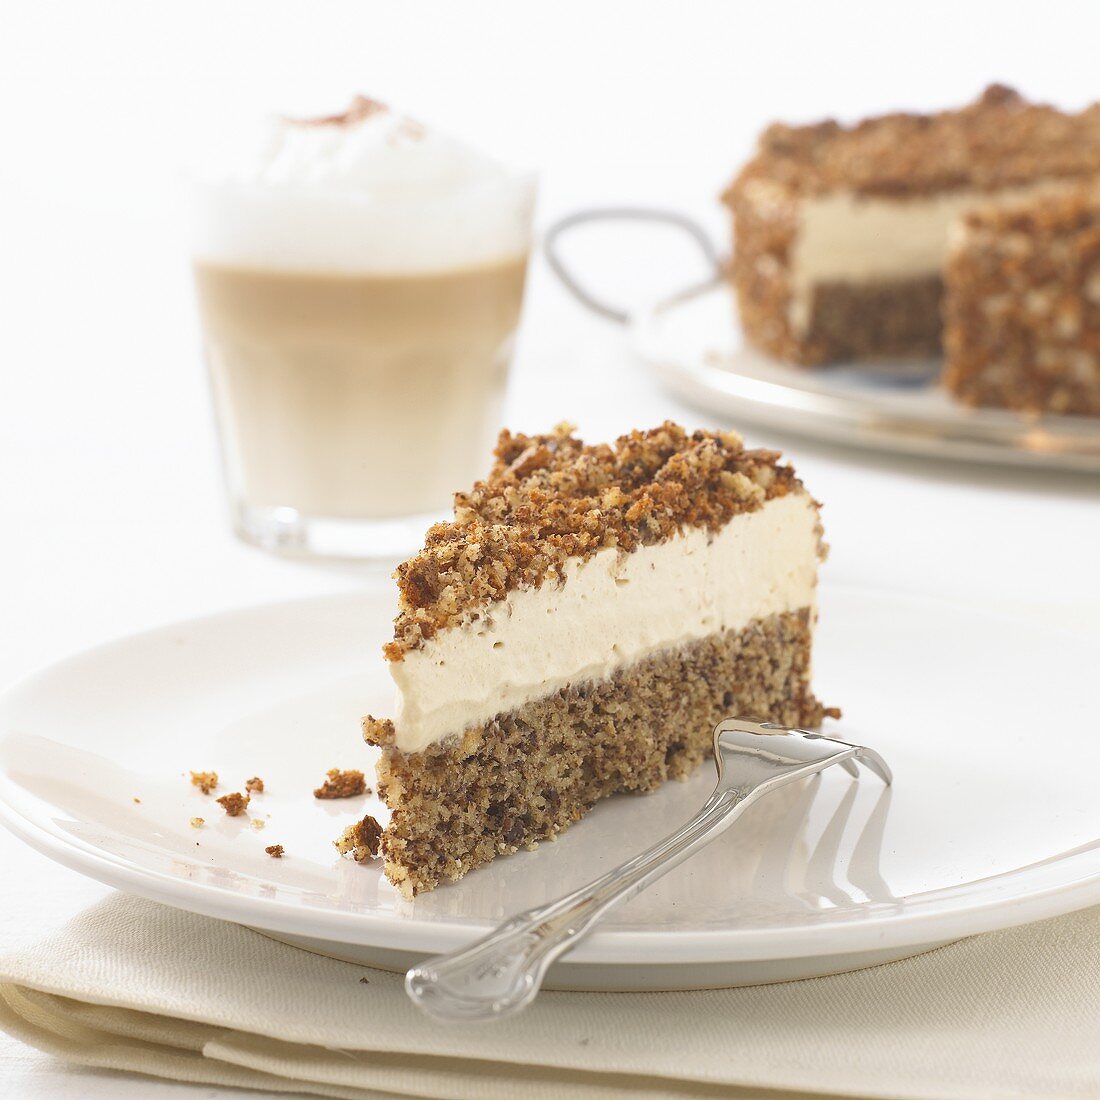 Cappuccino cake to serve with coffee